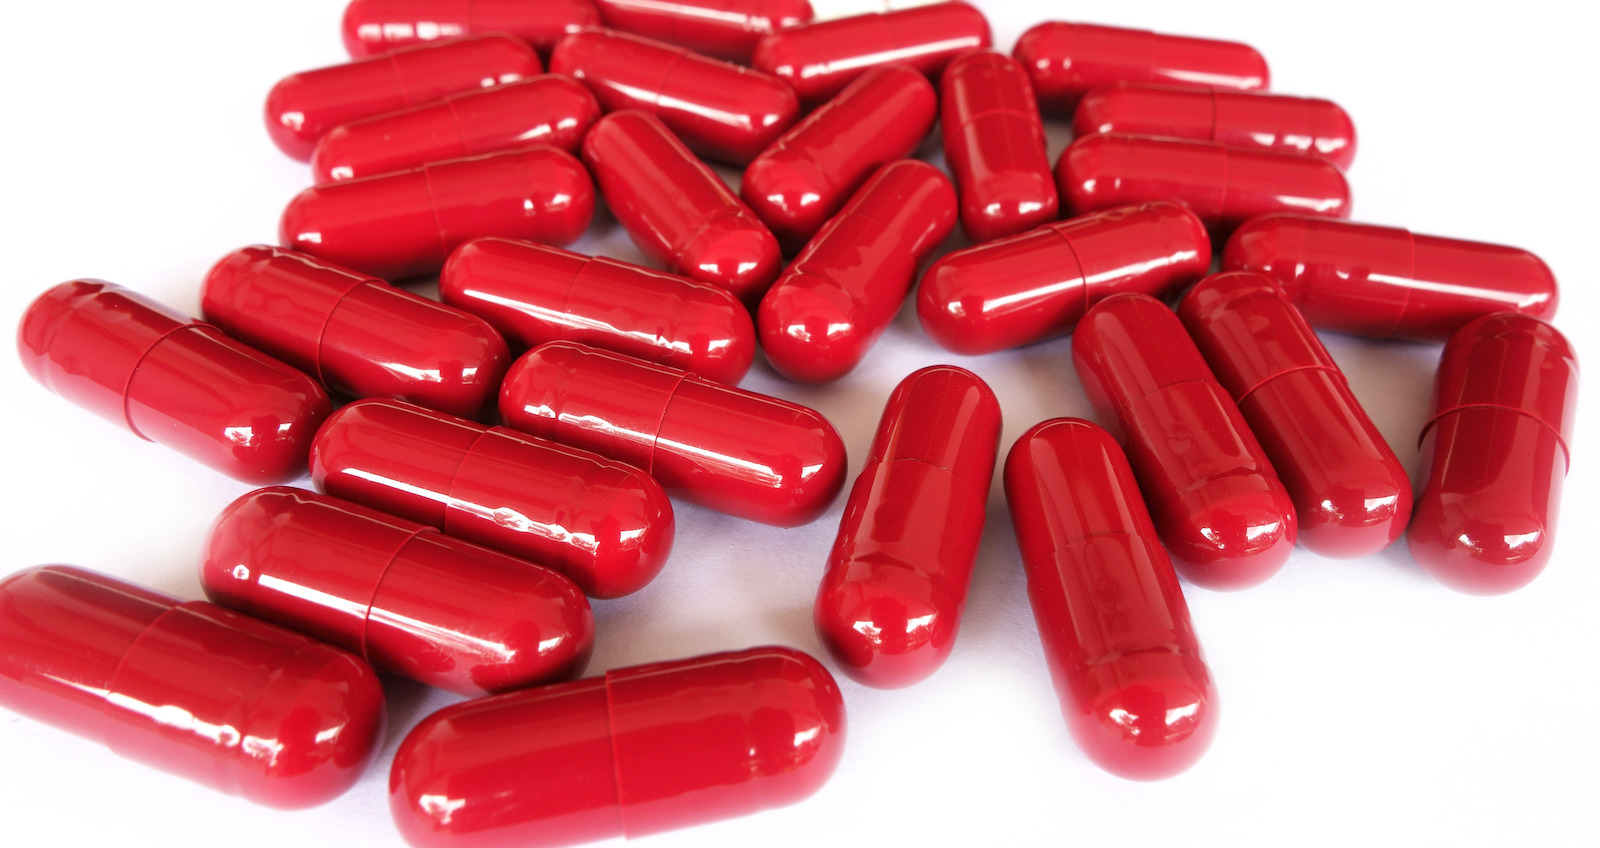 dyr Legeme Optimisme Too Many Red Pills Can Be Bad for Your Health - Crisis Magazine